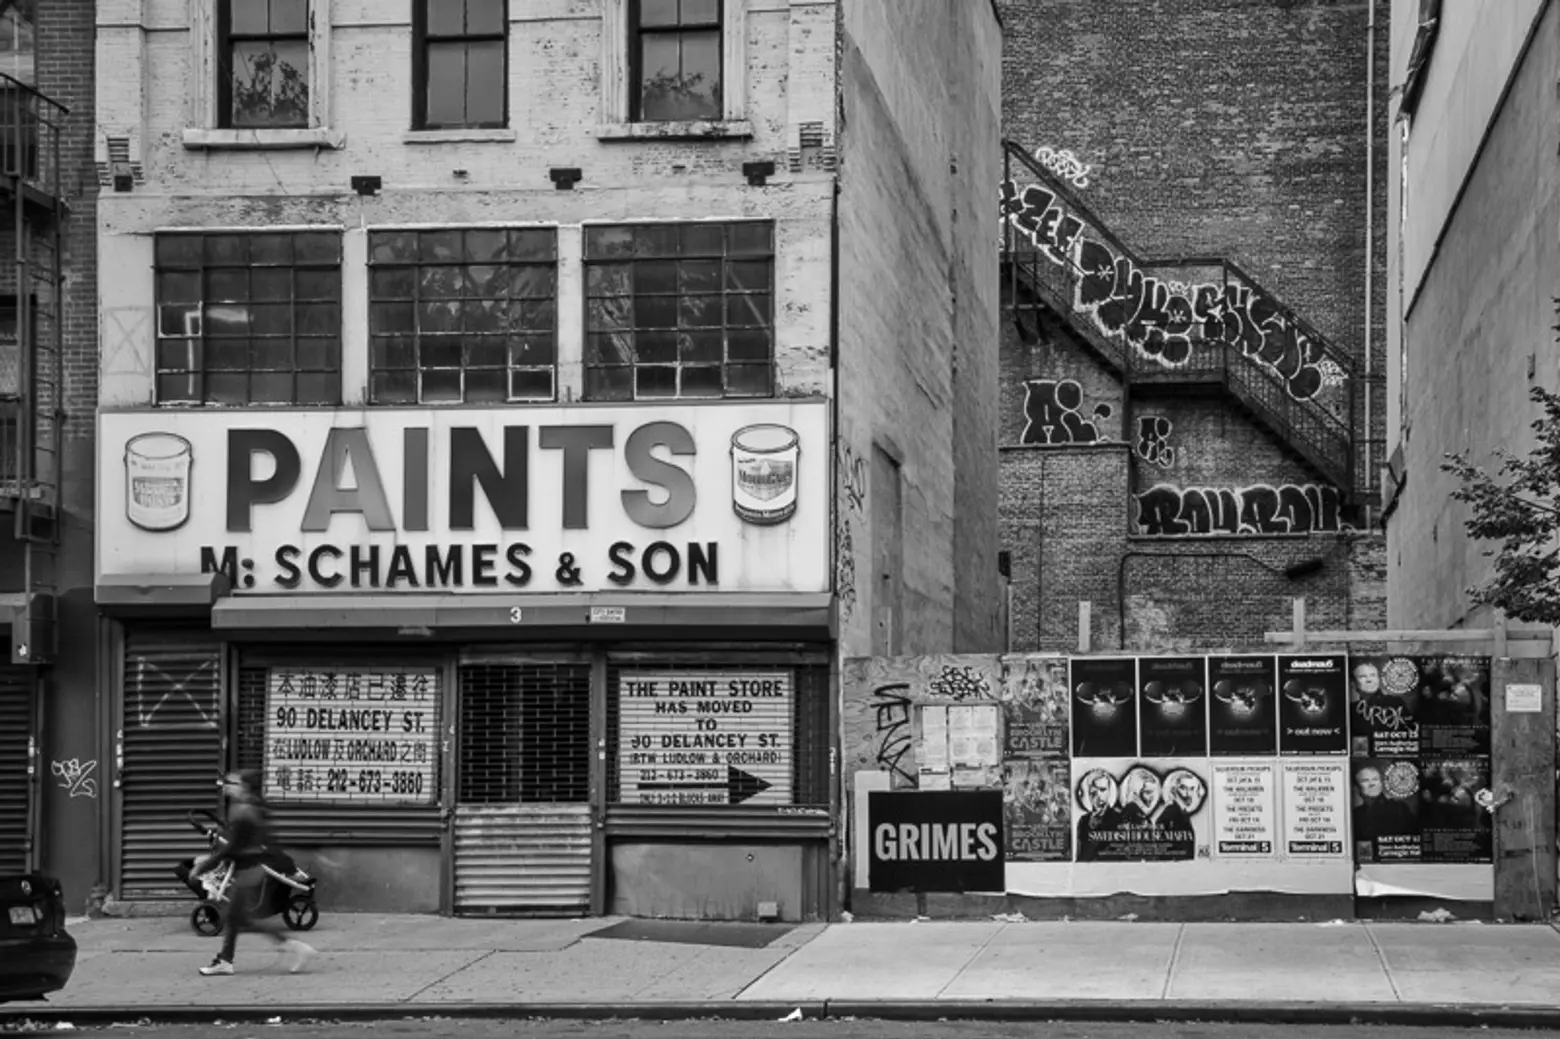 The Urban Lens: Photographer Bob Estremera captures vestiges of the Lower East Side’s early days